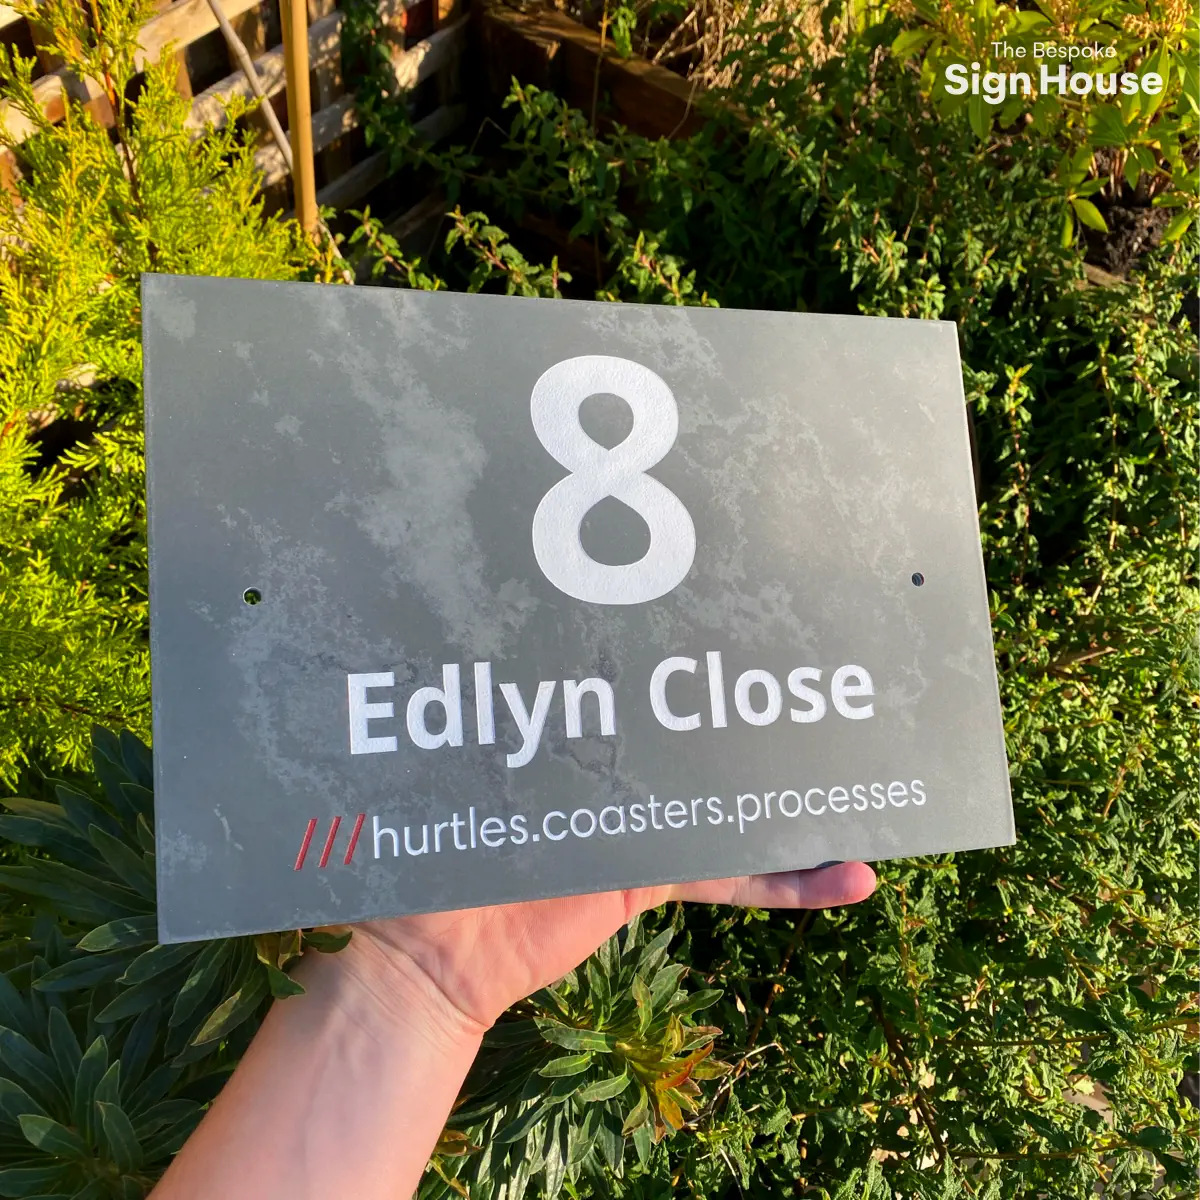 a grey slate sign with a customers house address engraved into it along with their what3words address. The sign reads 8 Edlyn Close ///hurtles.coasters.processess